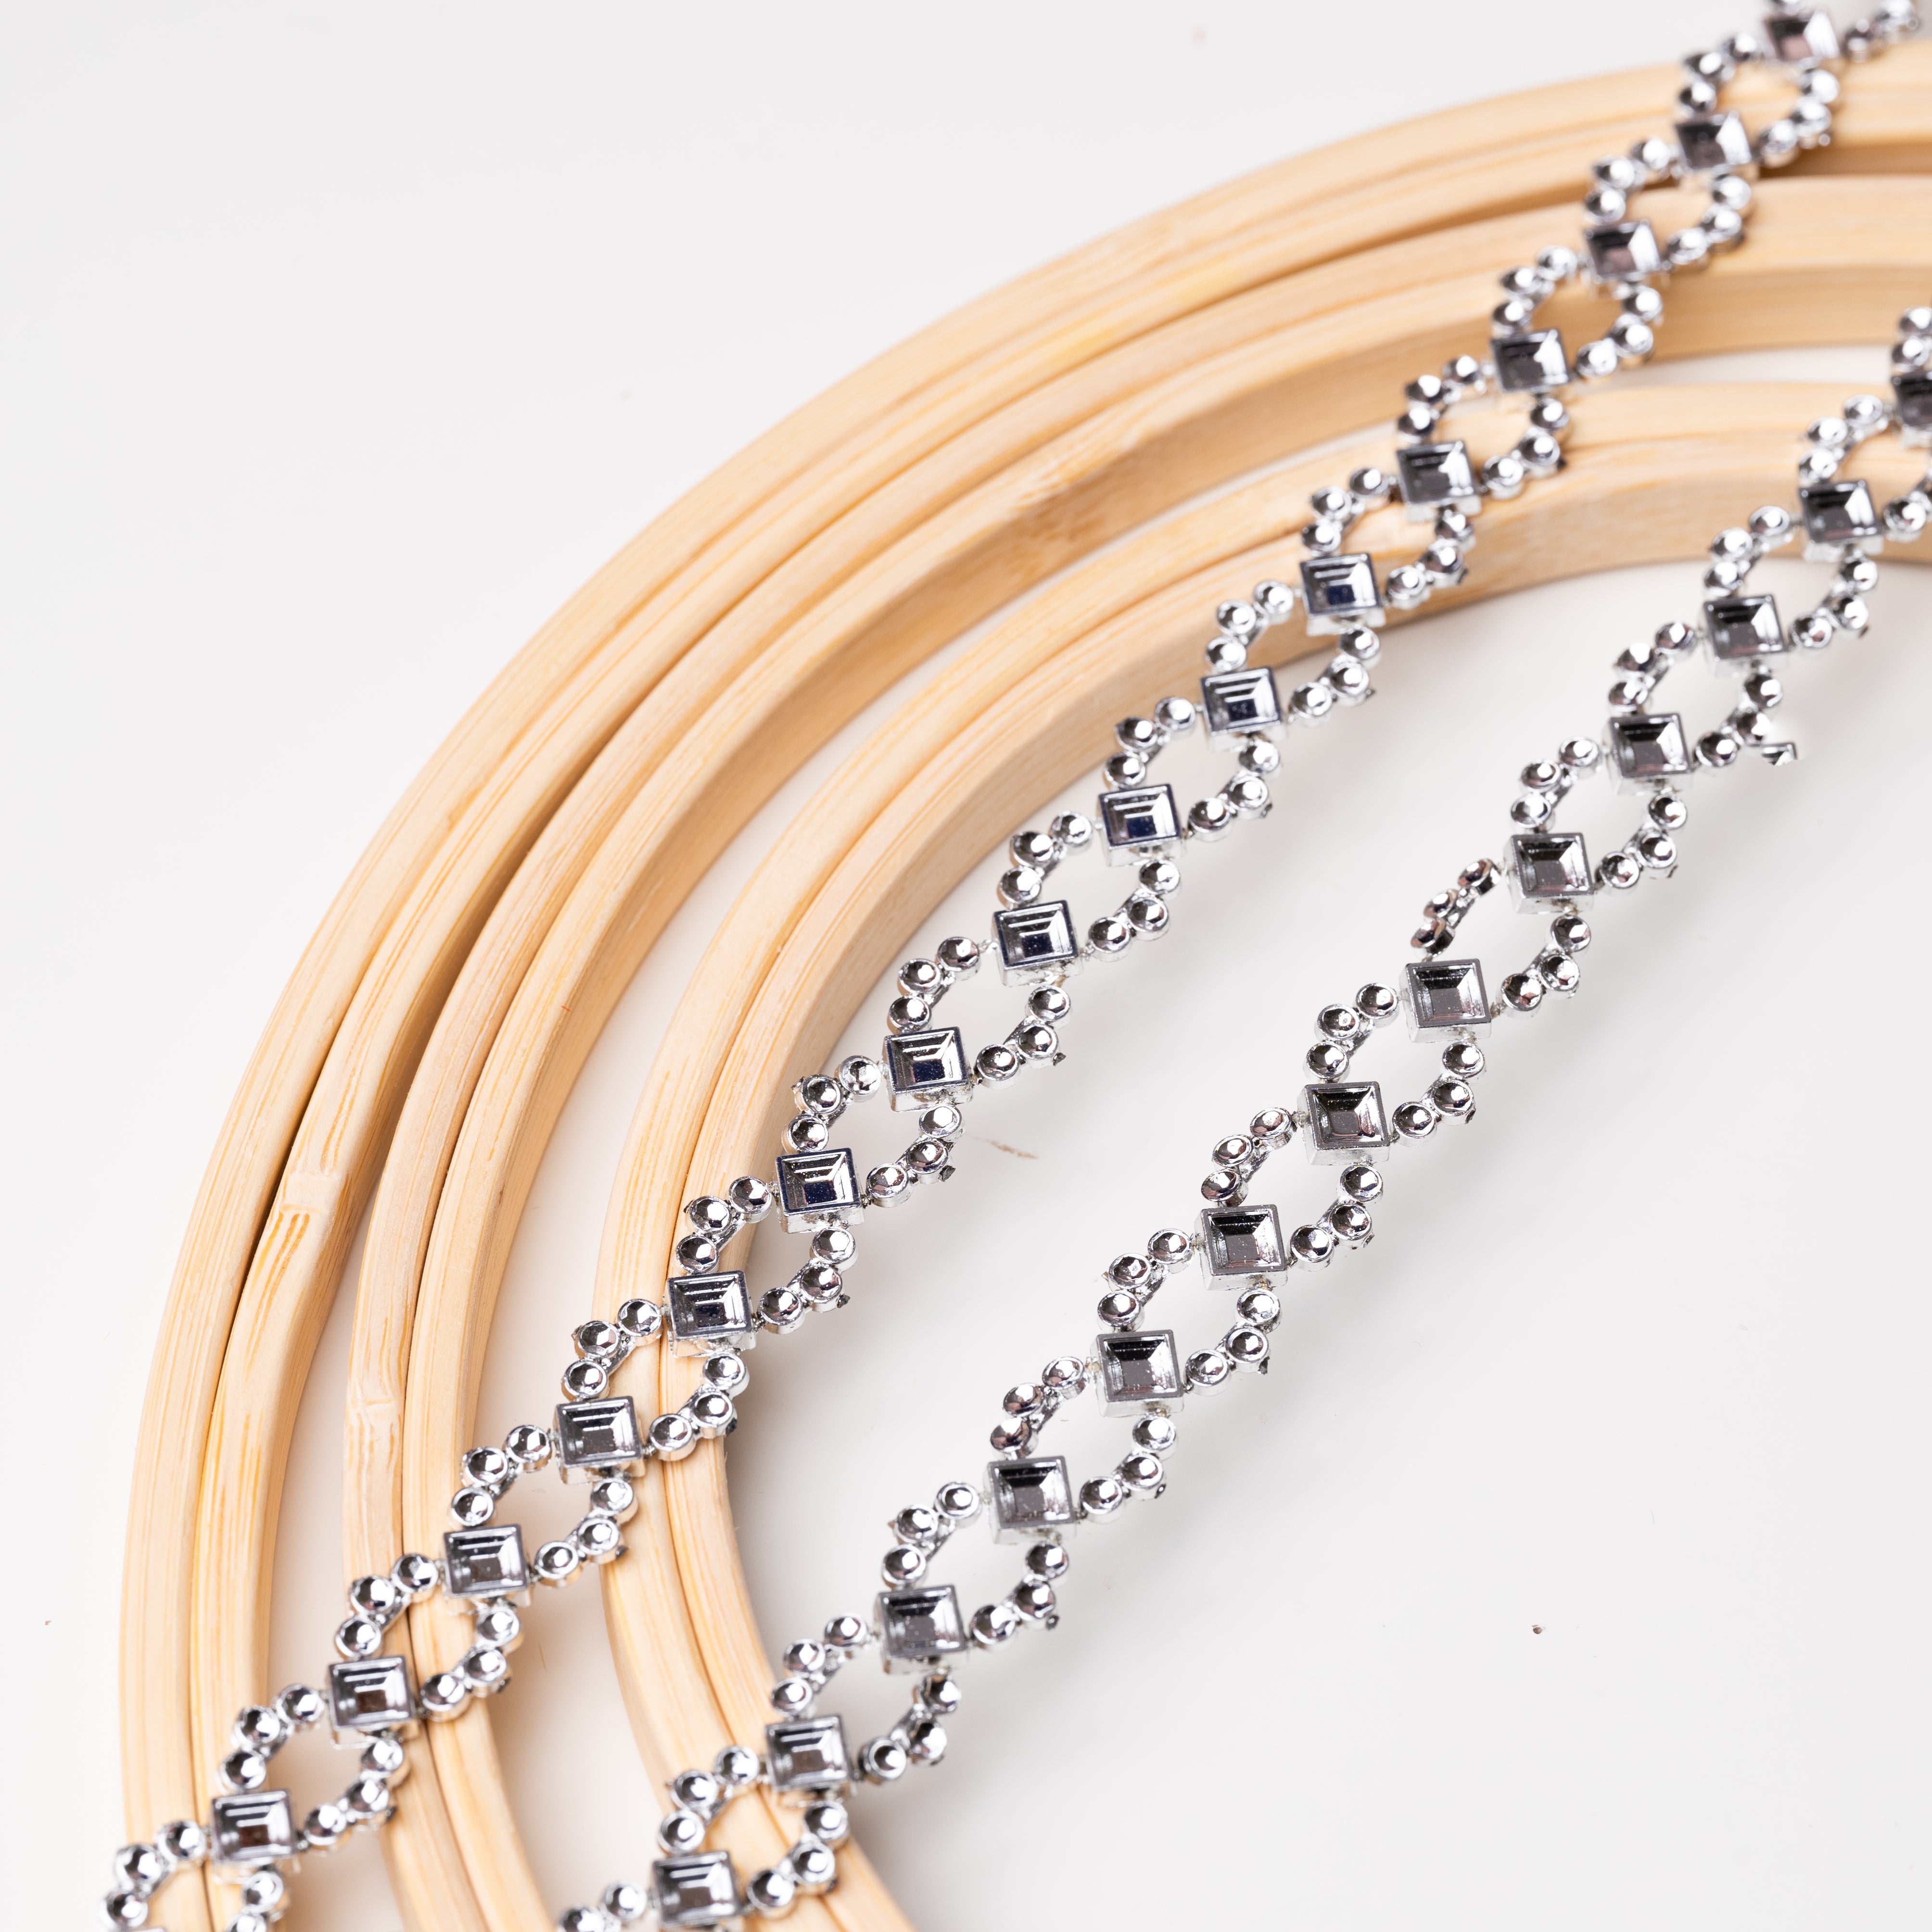 Silver diamante chain trim laying flat across wooden embroidery rings.